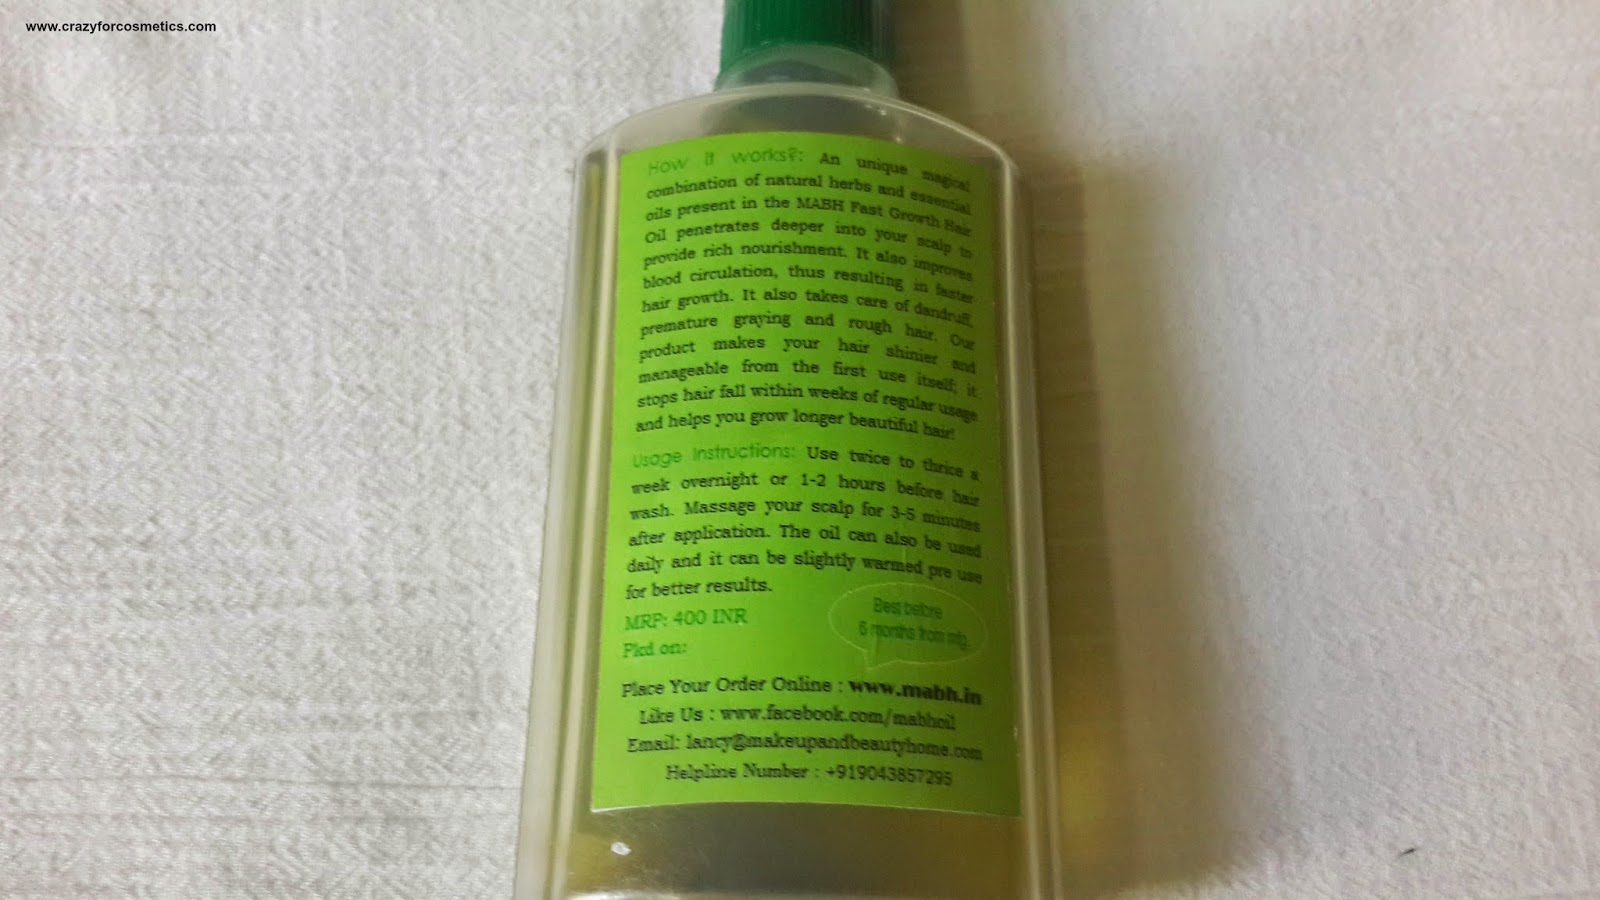 MABH hair oil review- MABh oils review- MABh hair oil buy online - MABh herbals- MABh oil Chennai- MABH Lancy- MABH fast growth hair oil review